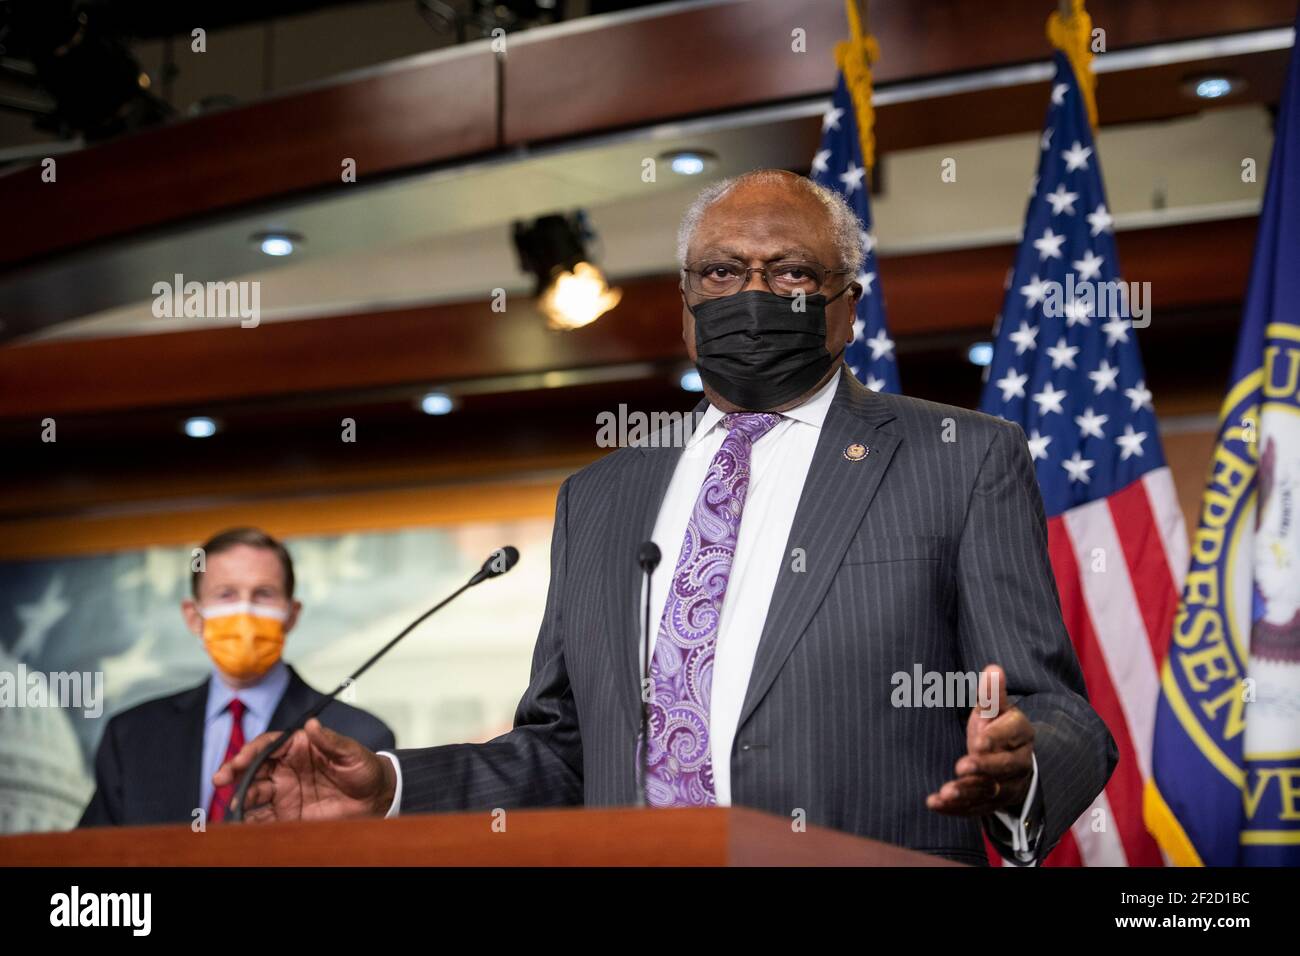 United States House Majority Whip James Clyburn (Democrat of South Carolina) offers remarks during a press conference on passage of gun violence prevention legislation at the U.S. Capitol in Washington, DC, Thursday, March 11, 2021. Credit: Rod Lamkey/CNP /MediaPunch Stock Photo